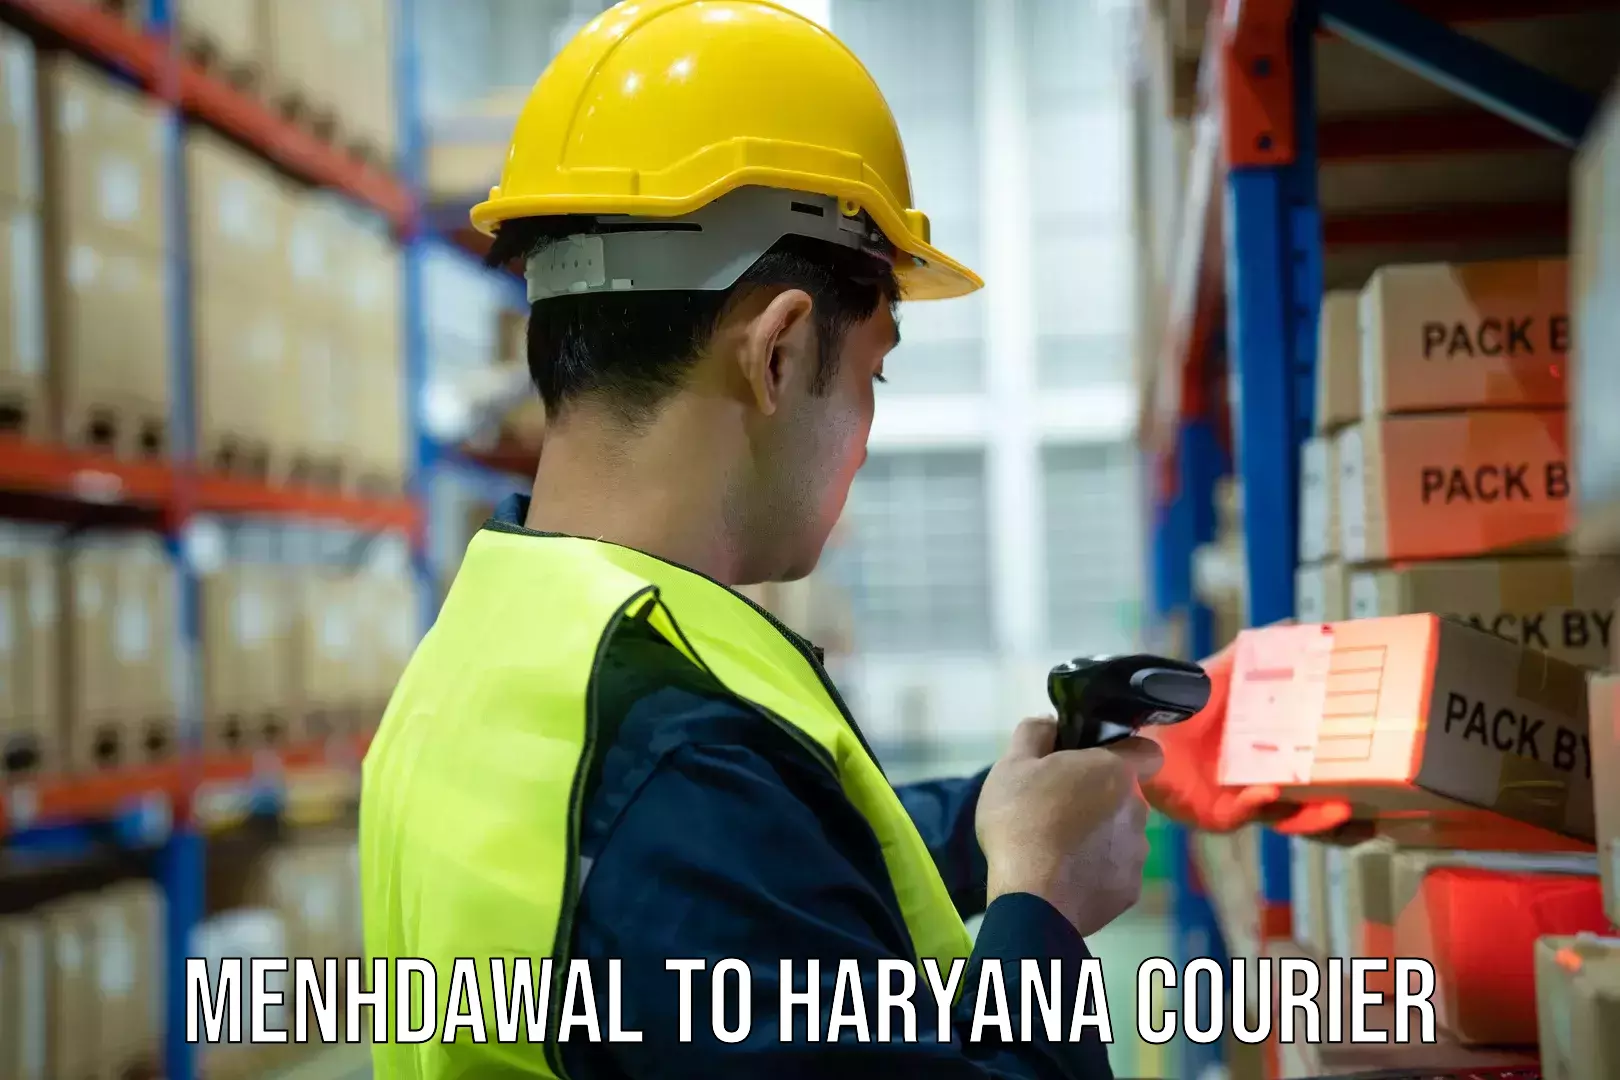 Premium delivery services Menhdawal to Haryana